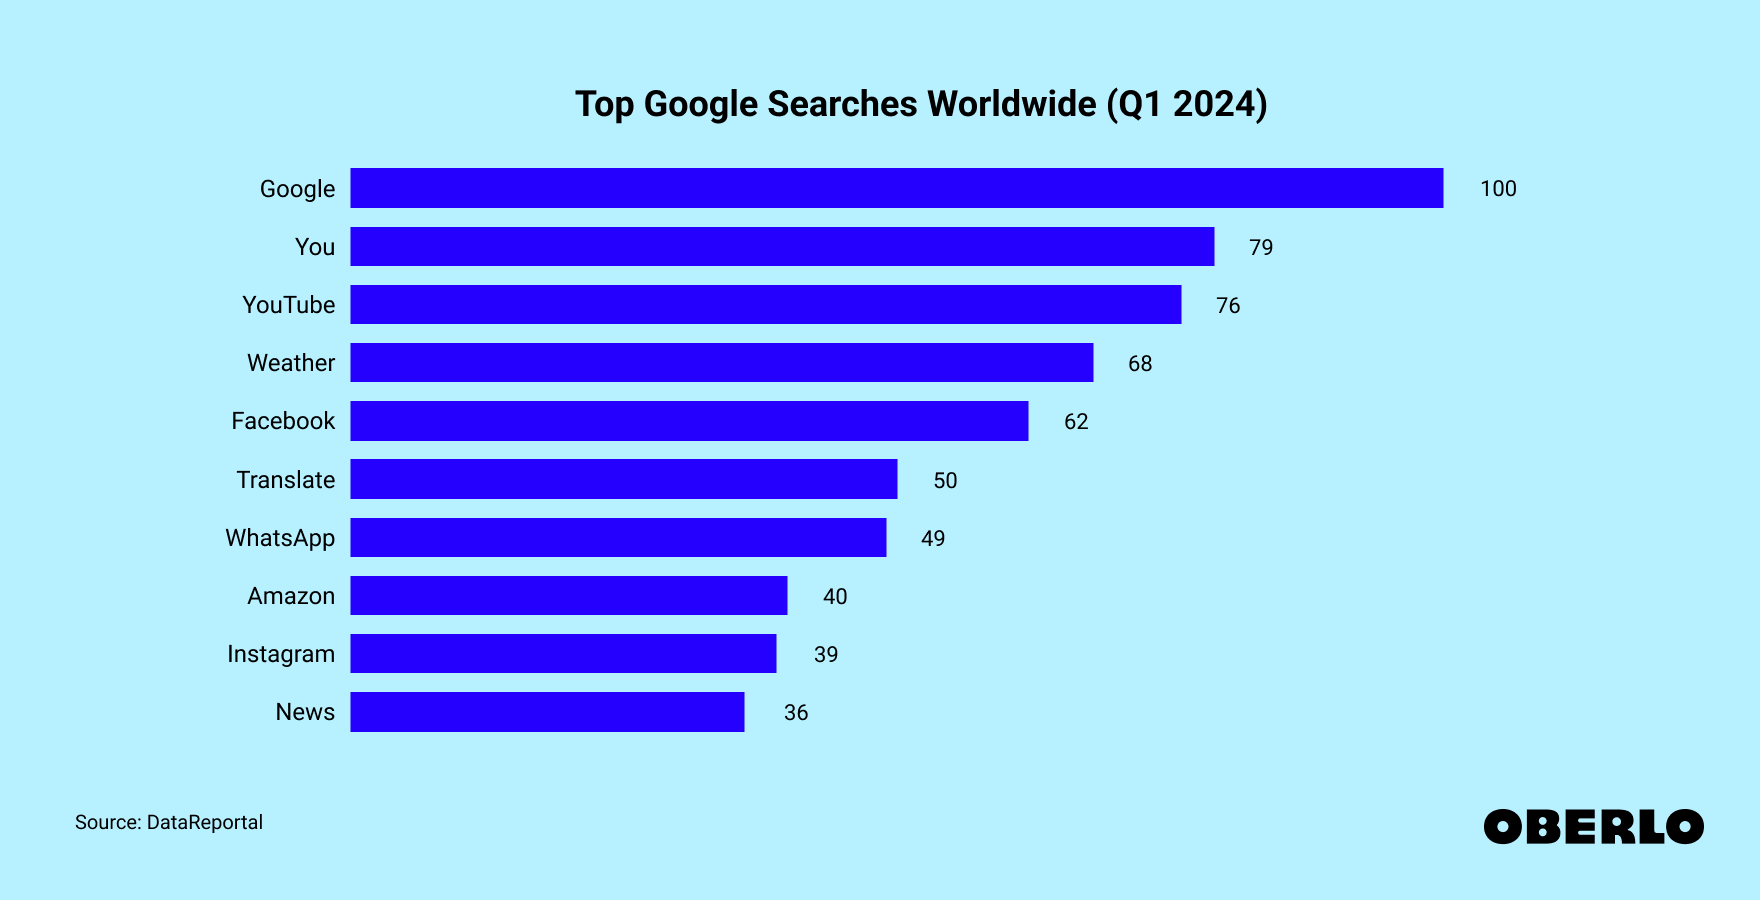 Chart showing: Top Google searches worldwide in Q1 2024